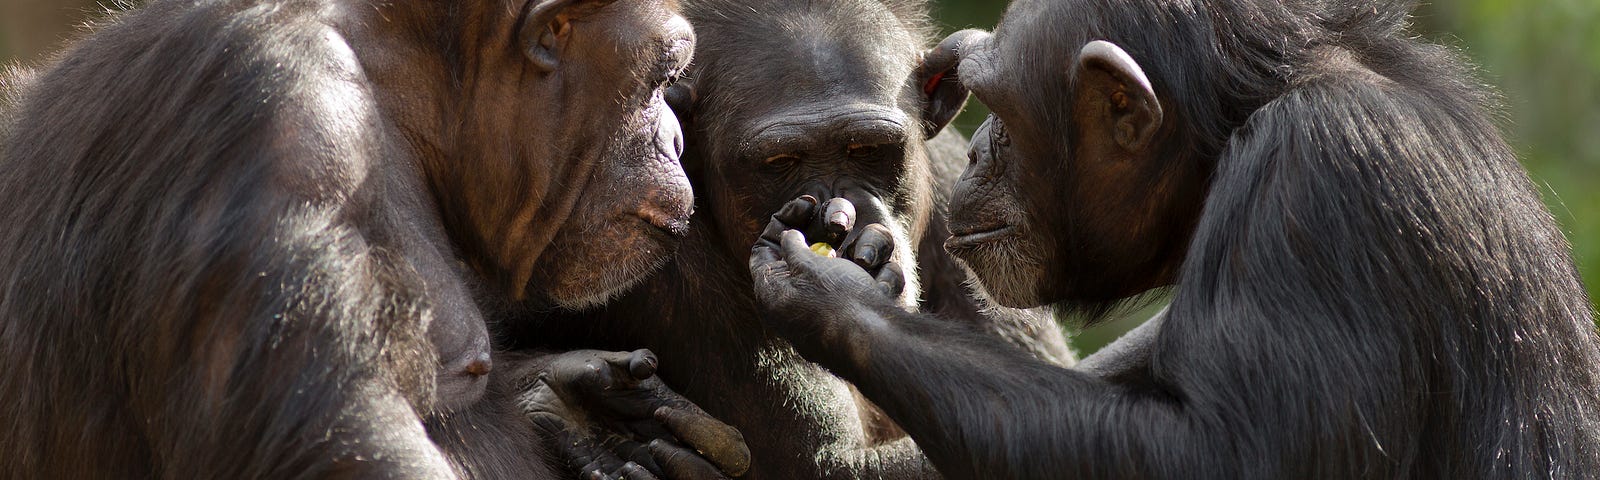 A chimpanzee holds up a piece of fruit for two other chimps to examine.